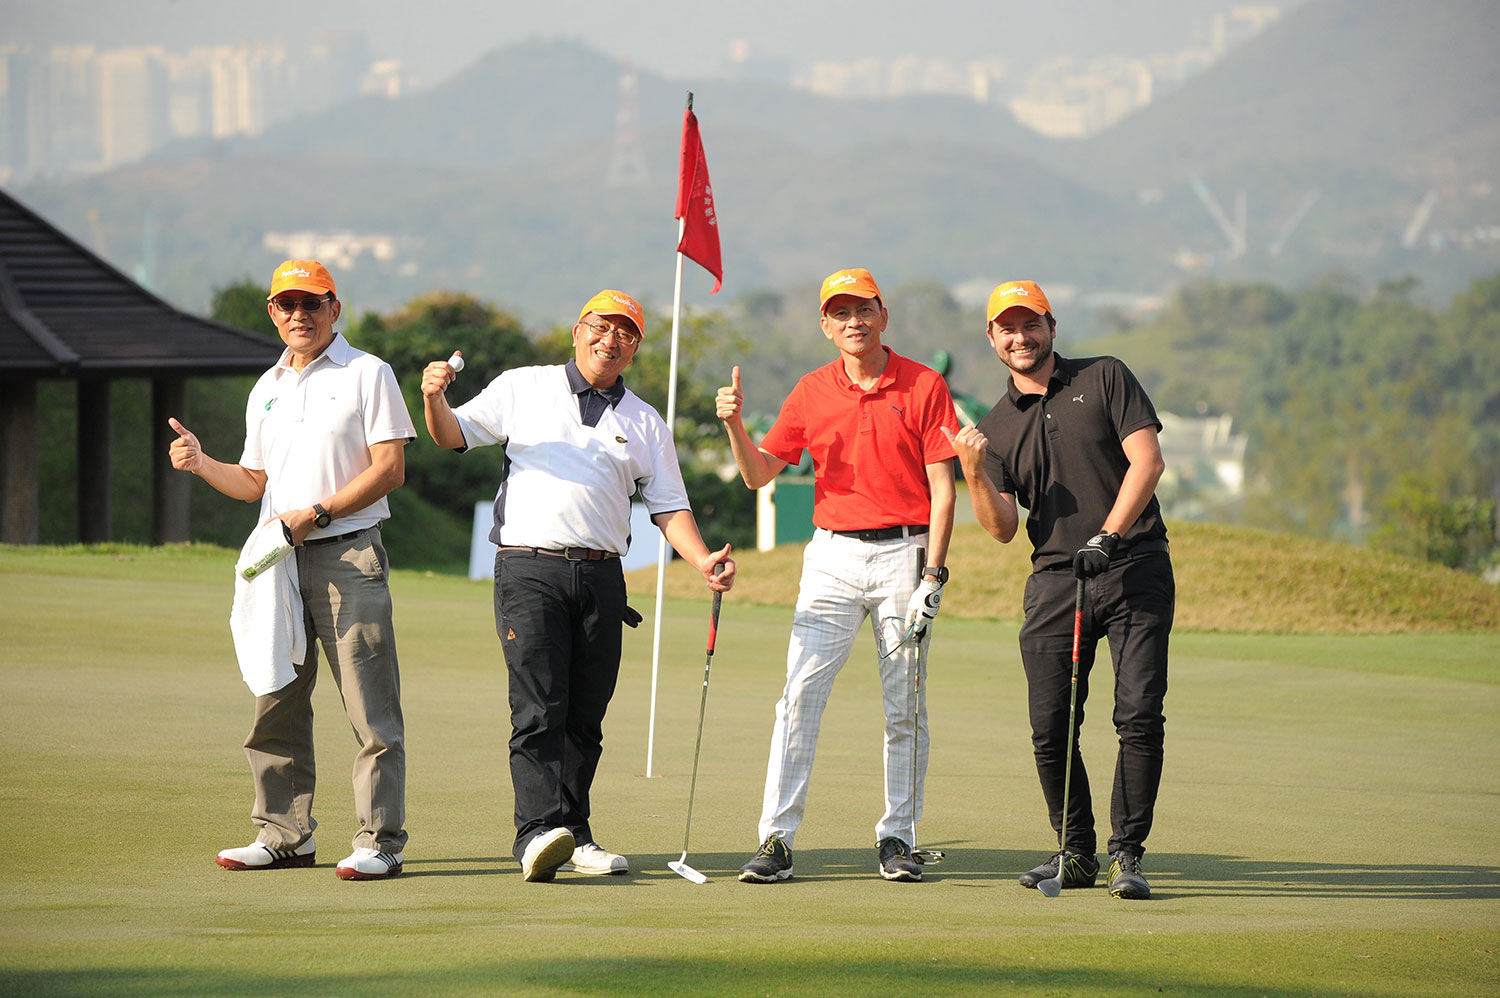 Foodlink’s Inaugural Charity Golf Tournament